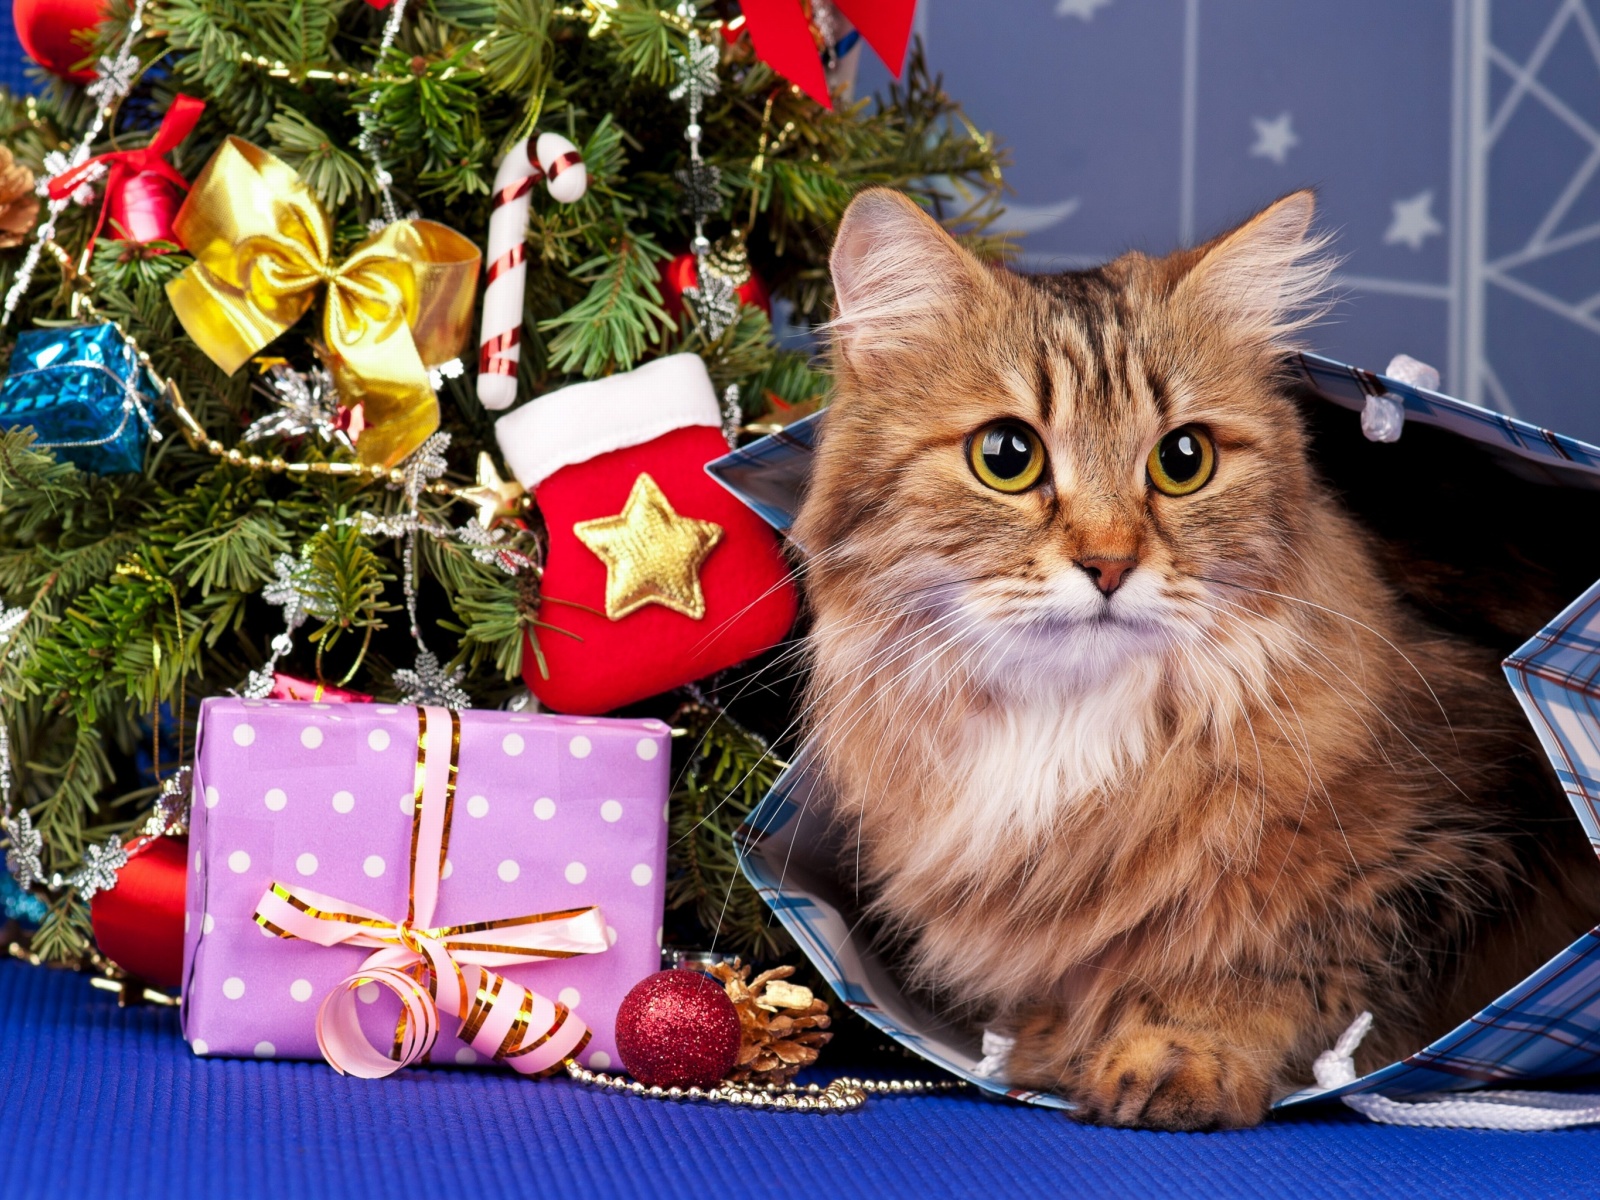 Merry Christmas Cards Wishes with Cat wallpaper 1600x1200